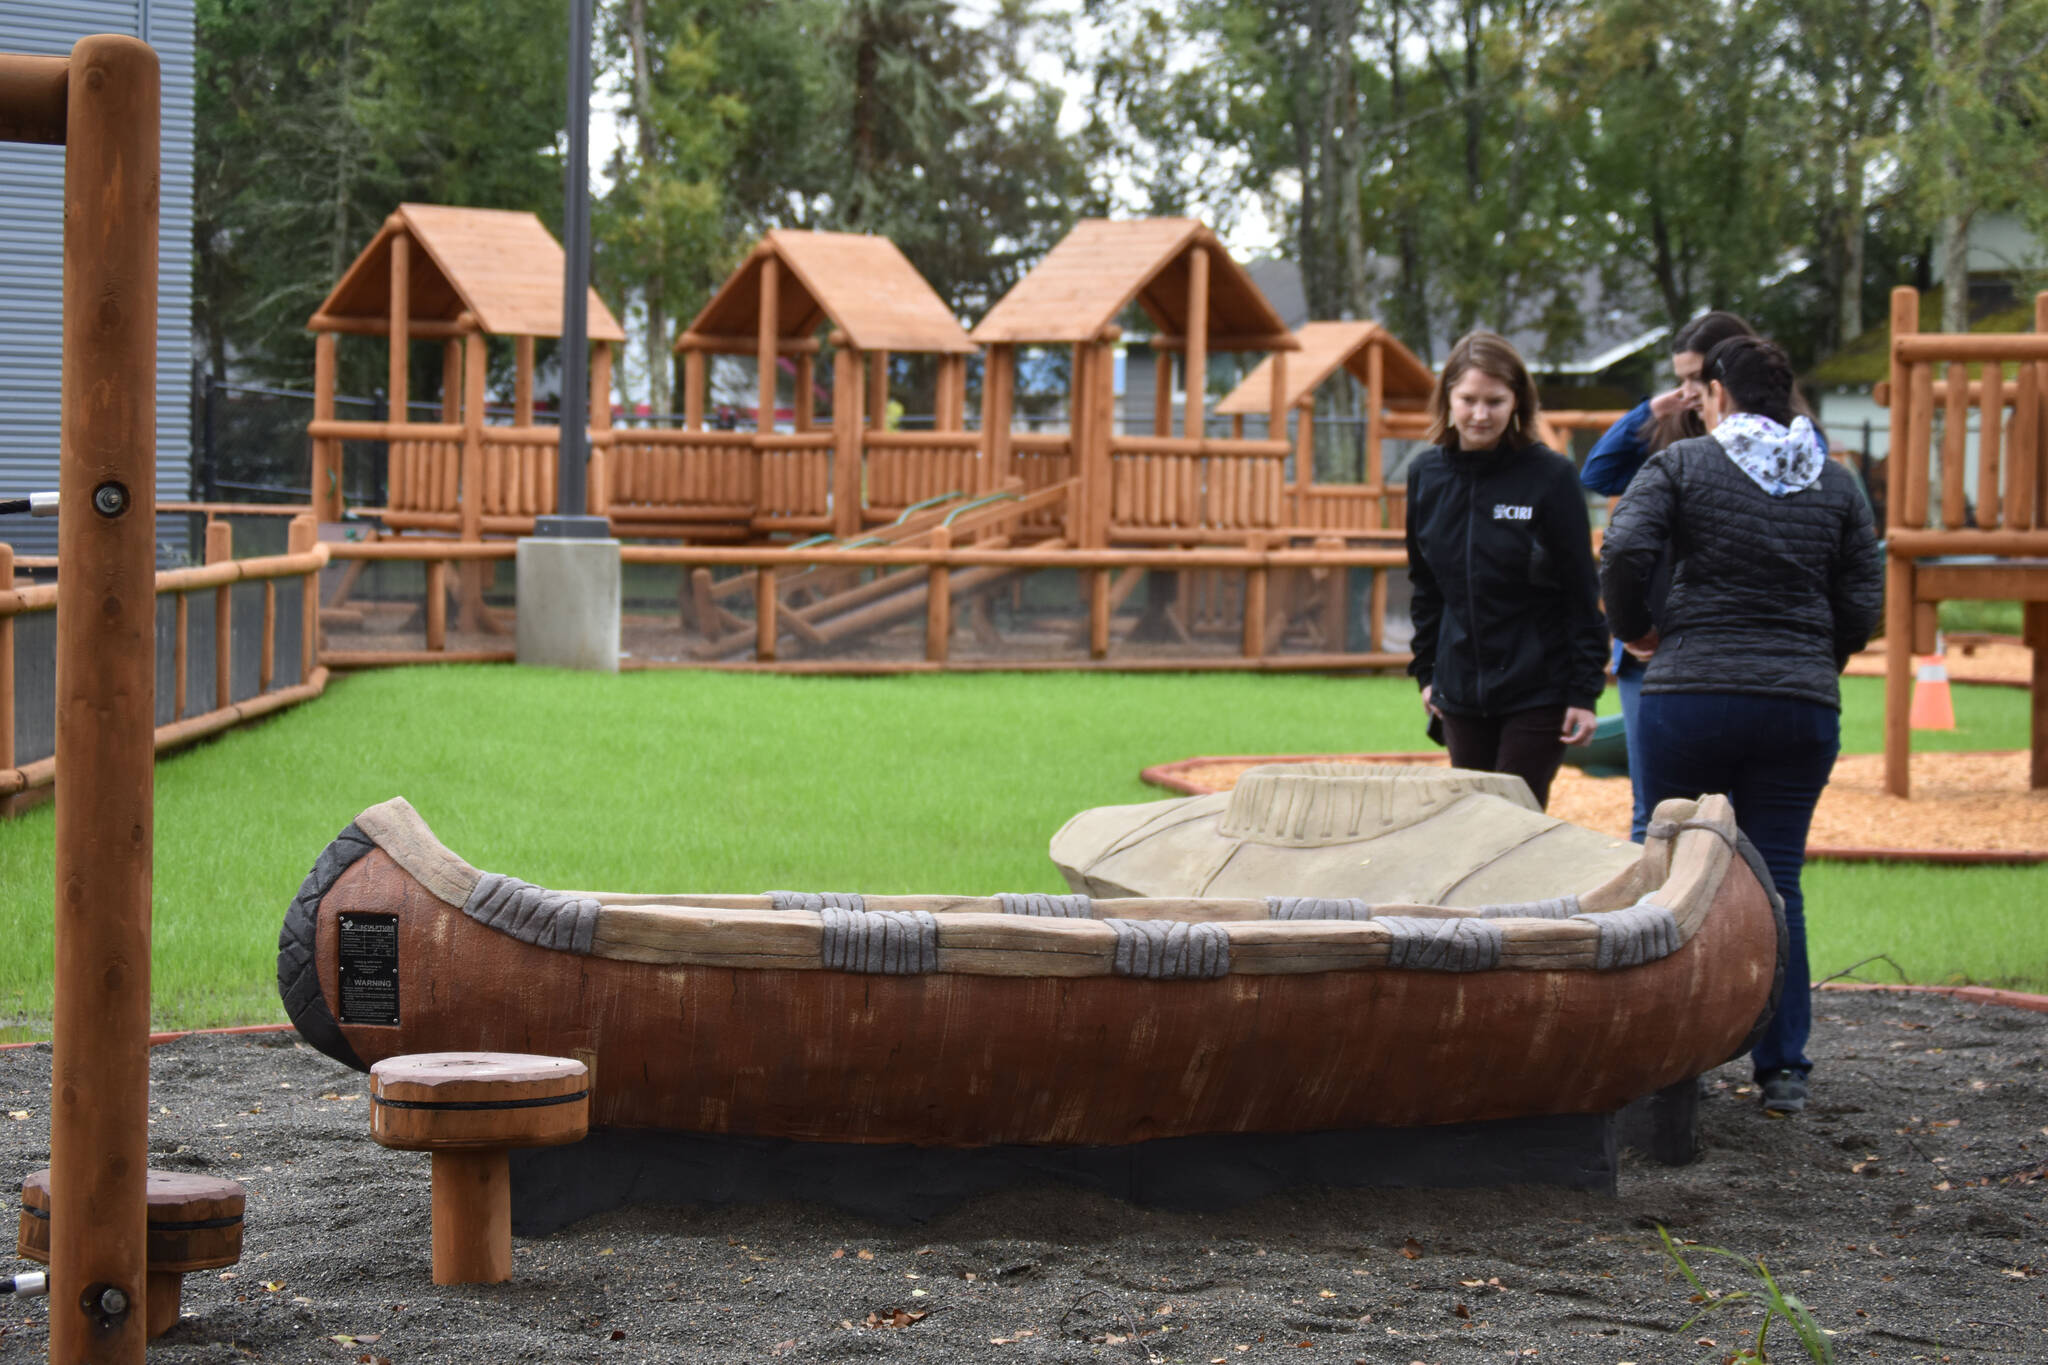 Members of a tour at the Kahtnuht’ana Duhdeldiht Campus check out the birch bark canoe and kayak on the playground on Thursday, Sept. 1, 2022, in Kenai, Alaska. (Jake Dye/Peninsula Clarion)